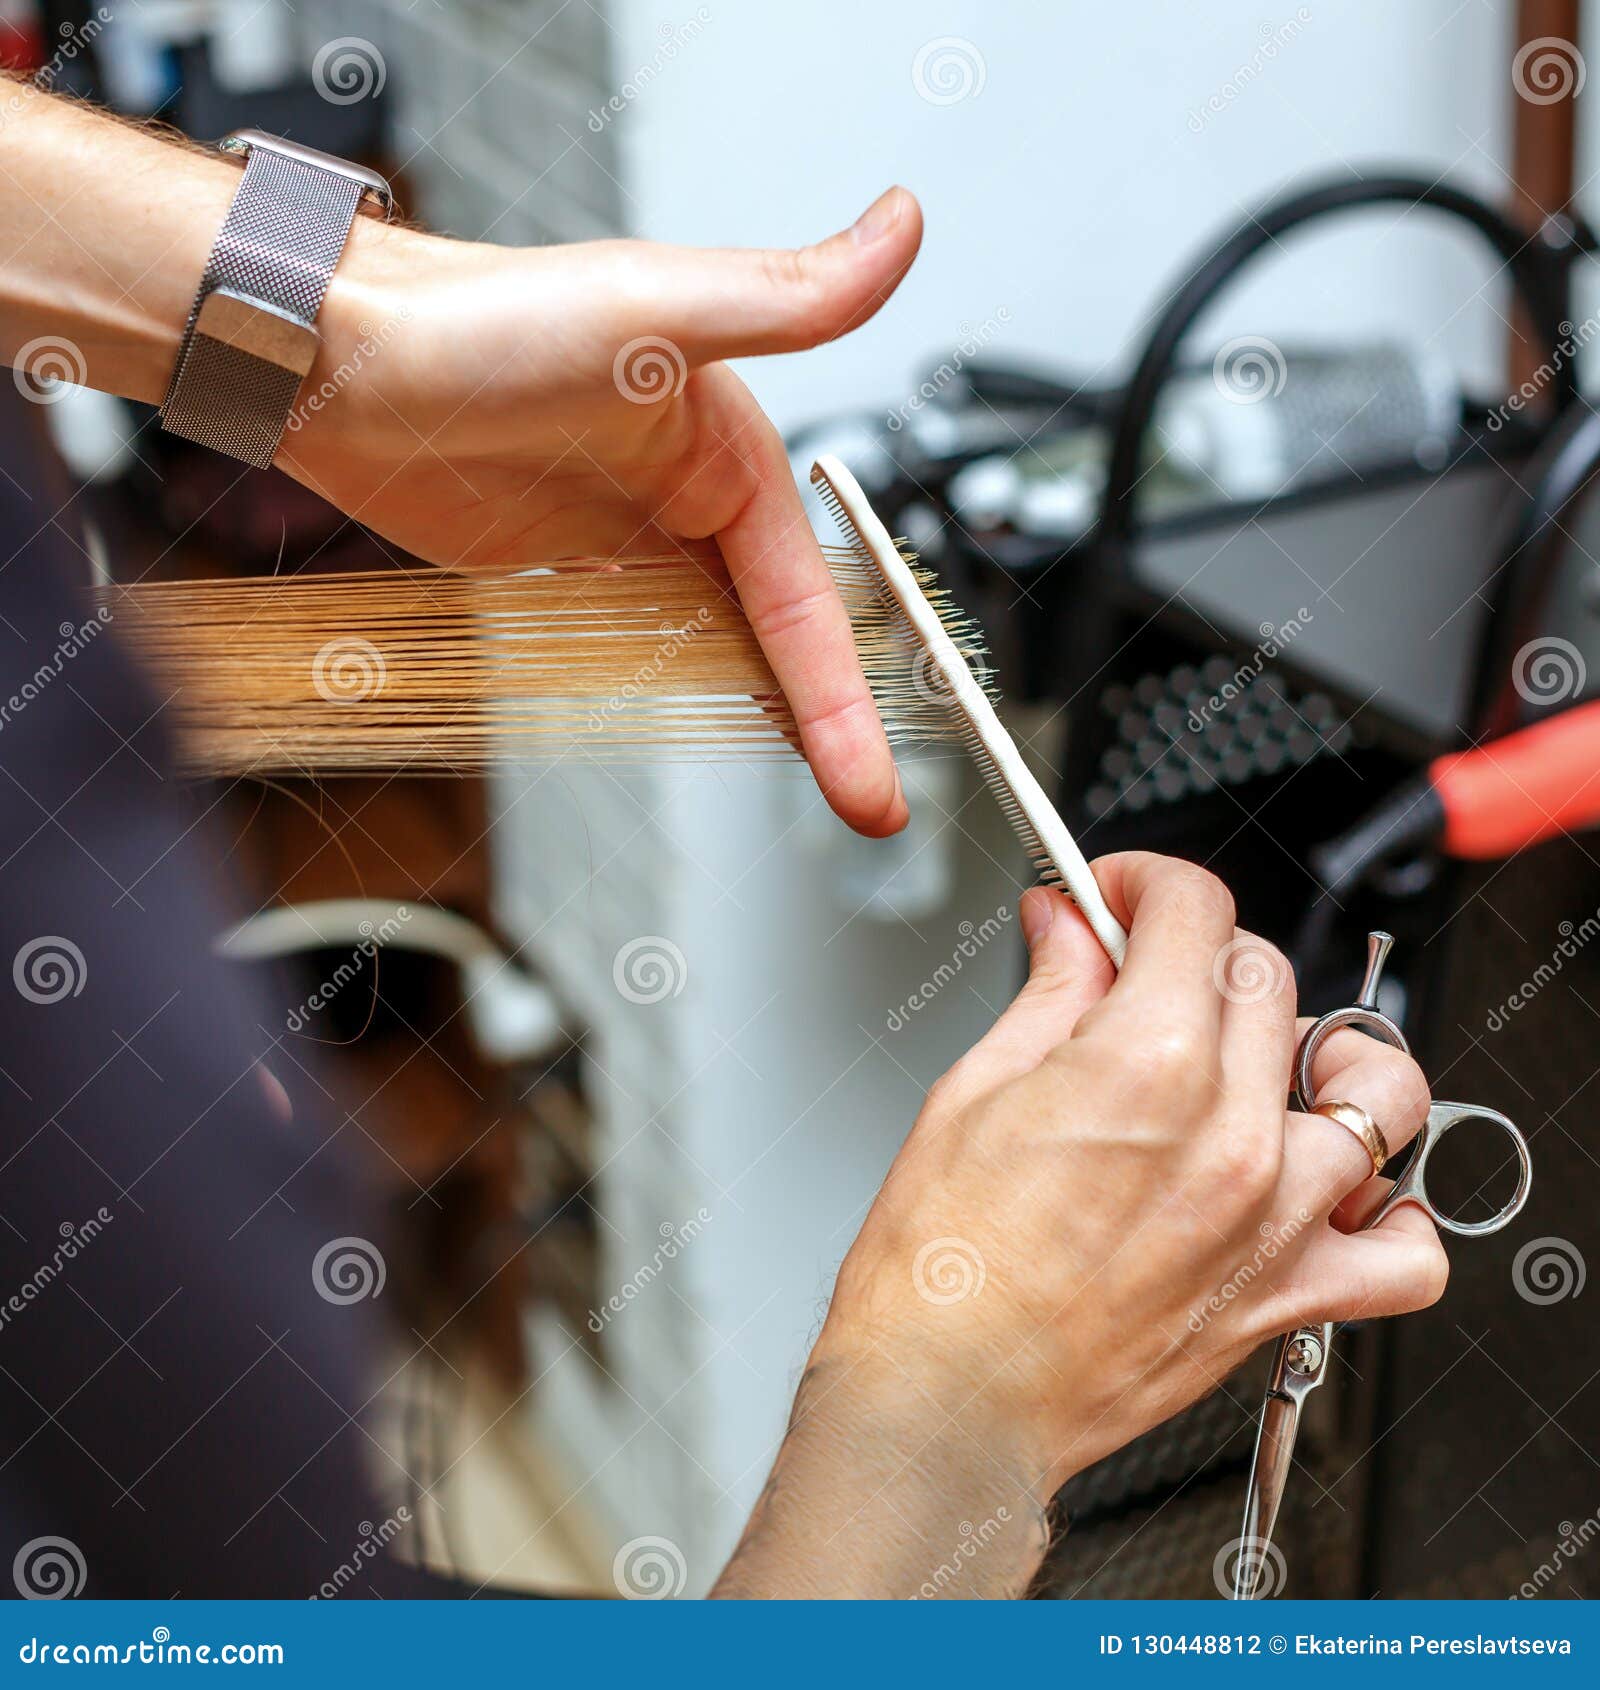 Professional Hairdresser with a Client in the Salon Stock Photo - Image